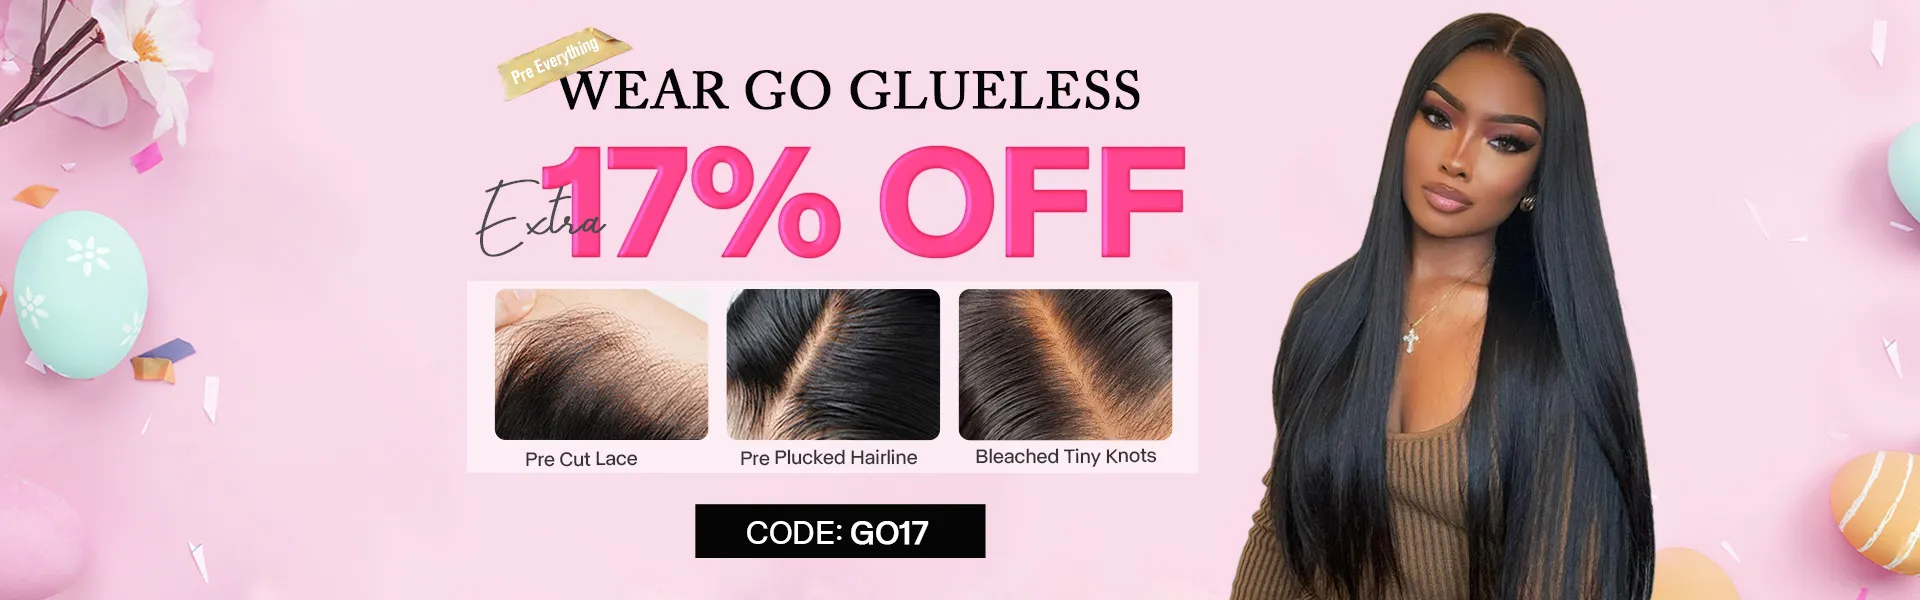 recool hair easter day wear go glueles